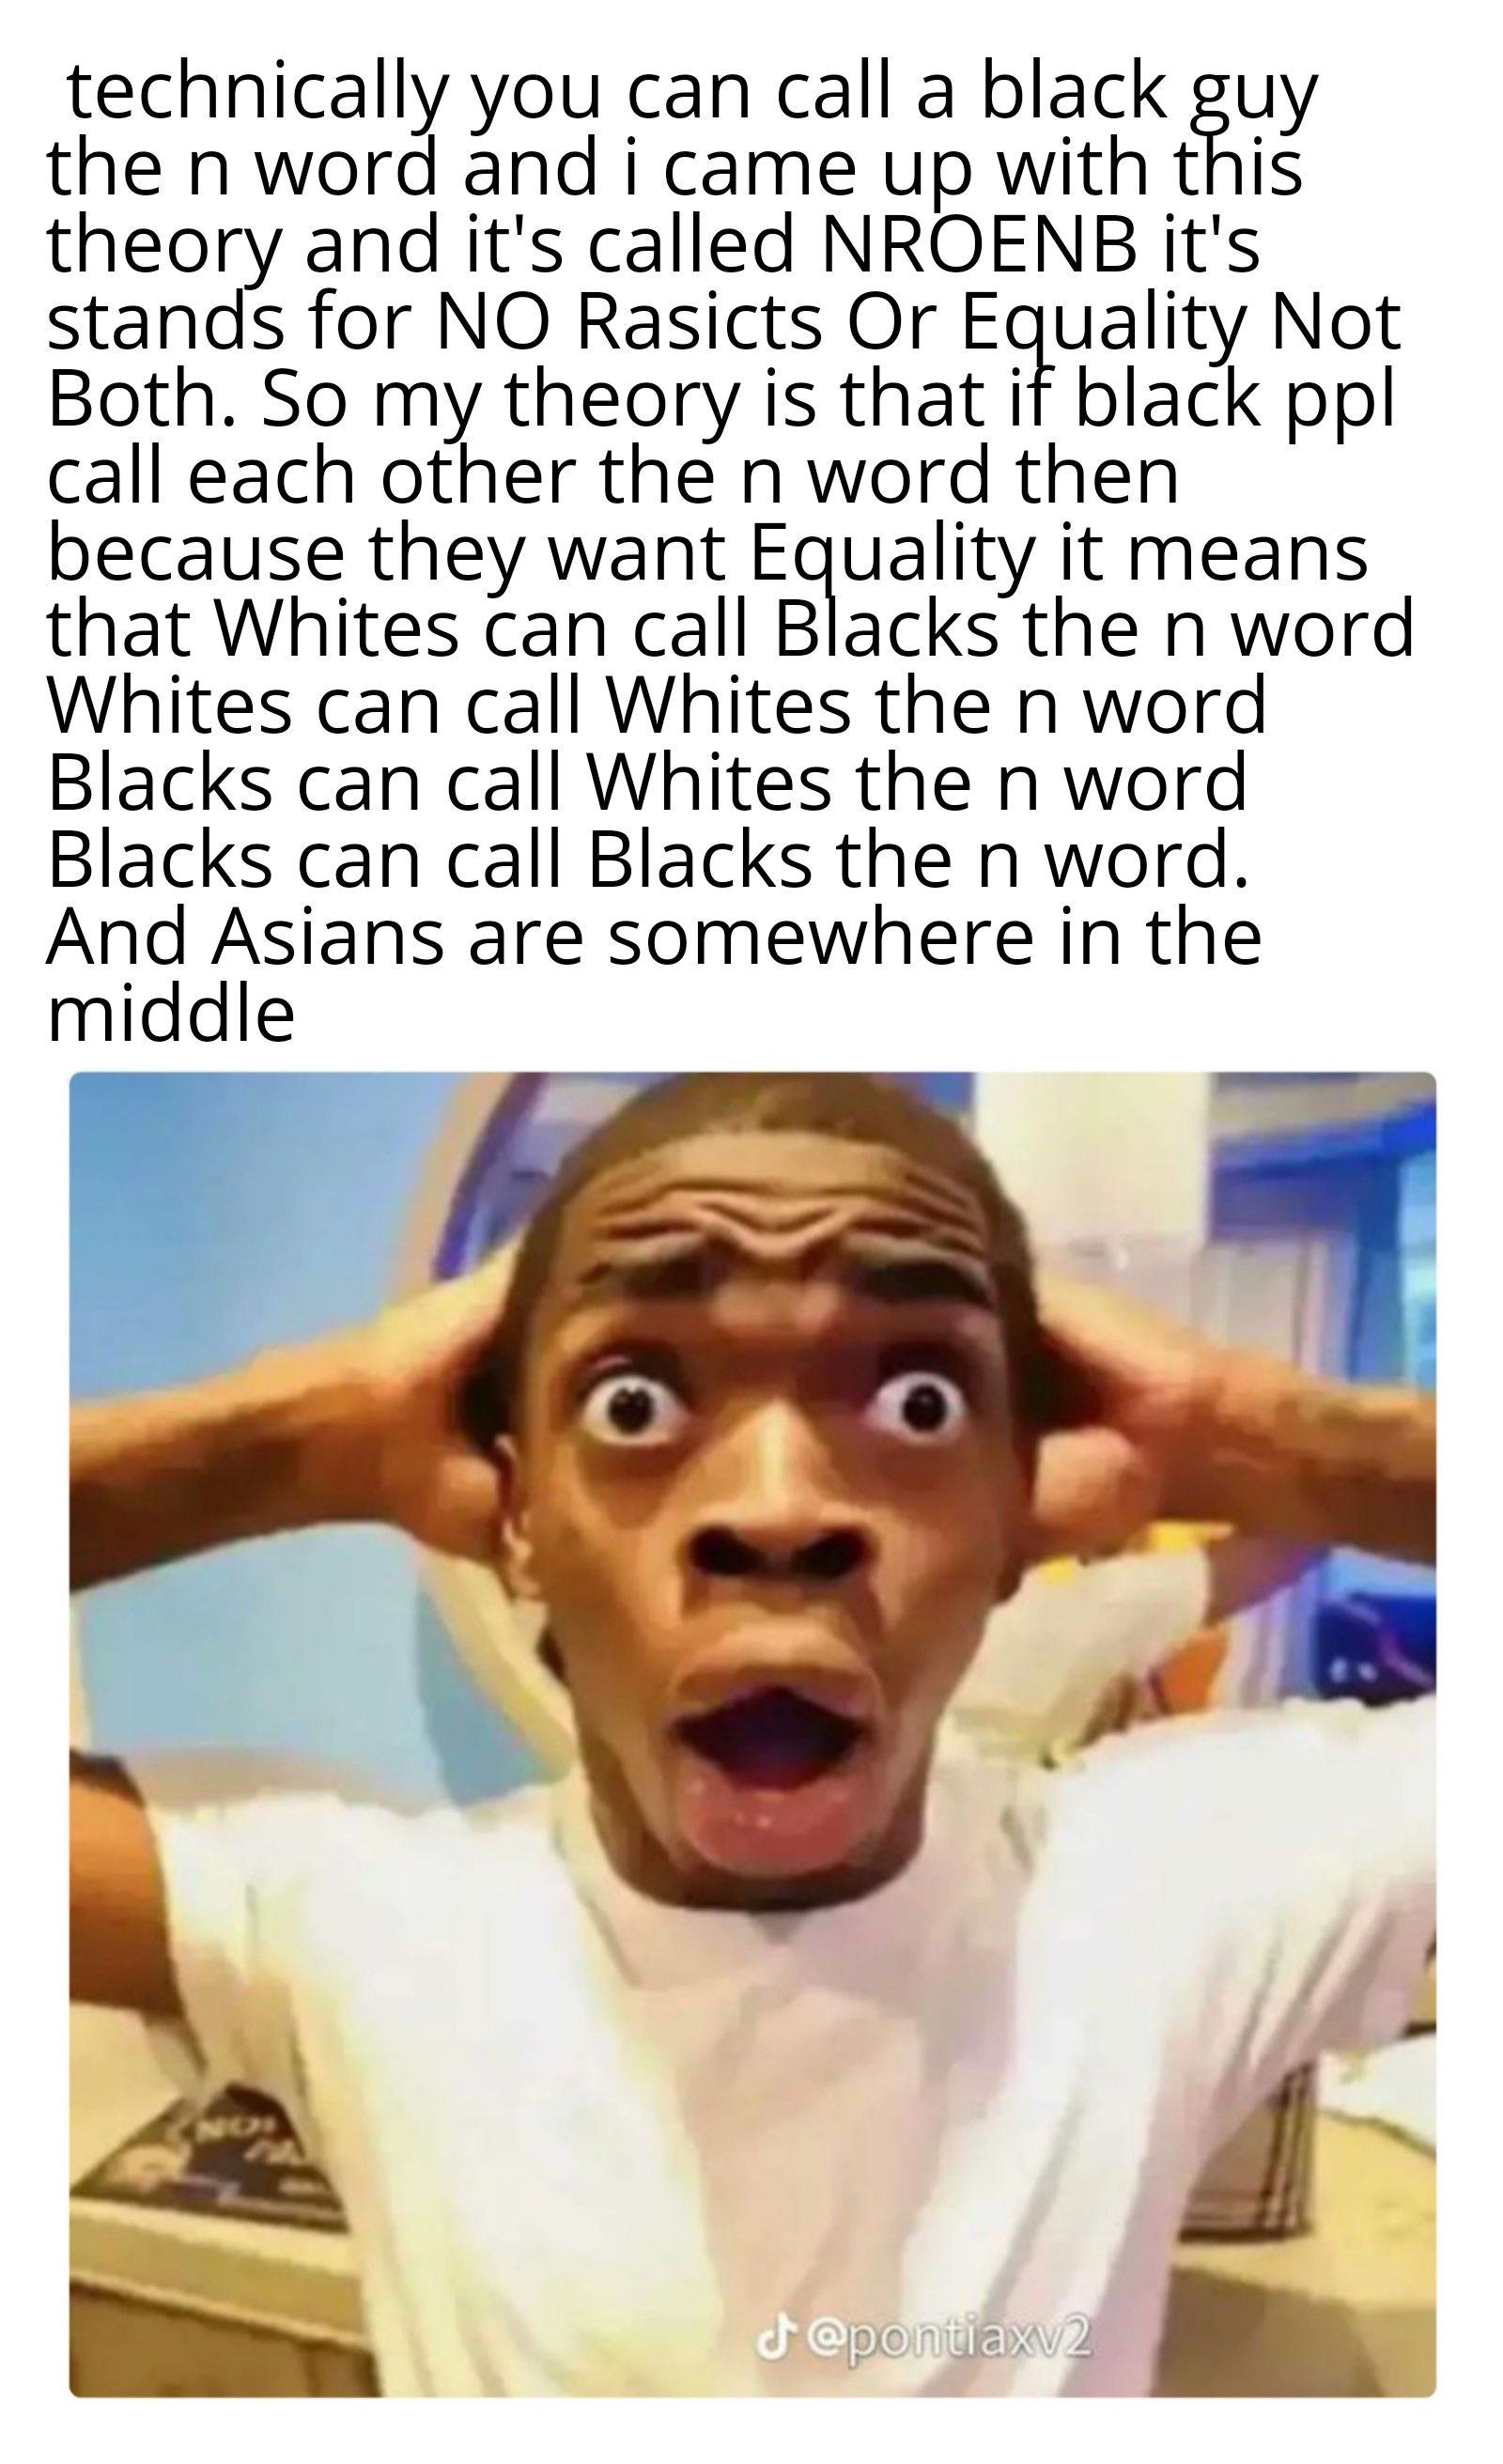 technically you can call a black guy
the n word and i came up with this
theory and it's called NROENB it's
stands for NO Rasicts Or Equality Not
Both. So my theory is that if black ppl
call each other the n word then
because they want Equality it means
that Whites can call Blacks the n word
Whites can call Whites the n word
Blacks can call Whites the n word
Blacks can call Blacks the n word.
And Asians are somewhere in the
middle
J@pontiaxv2